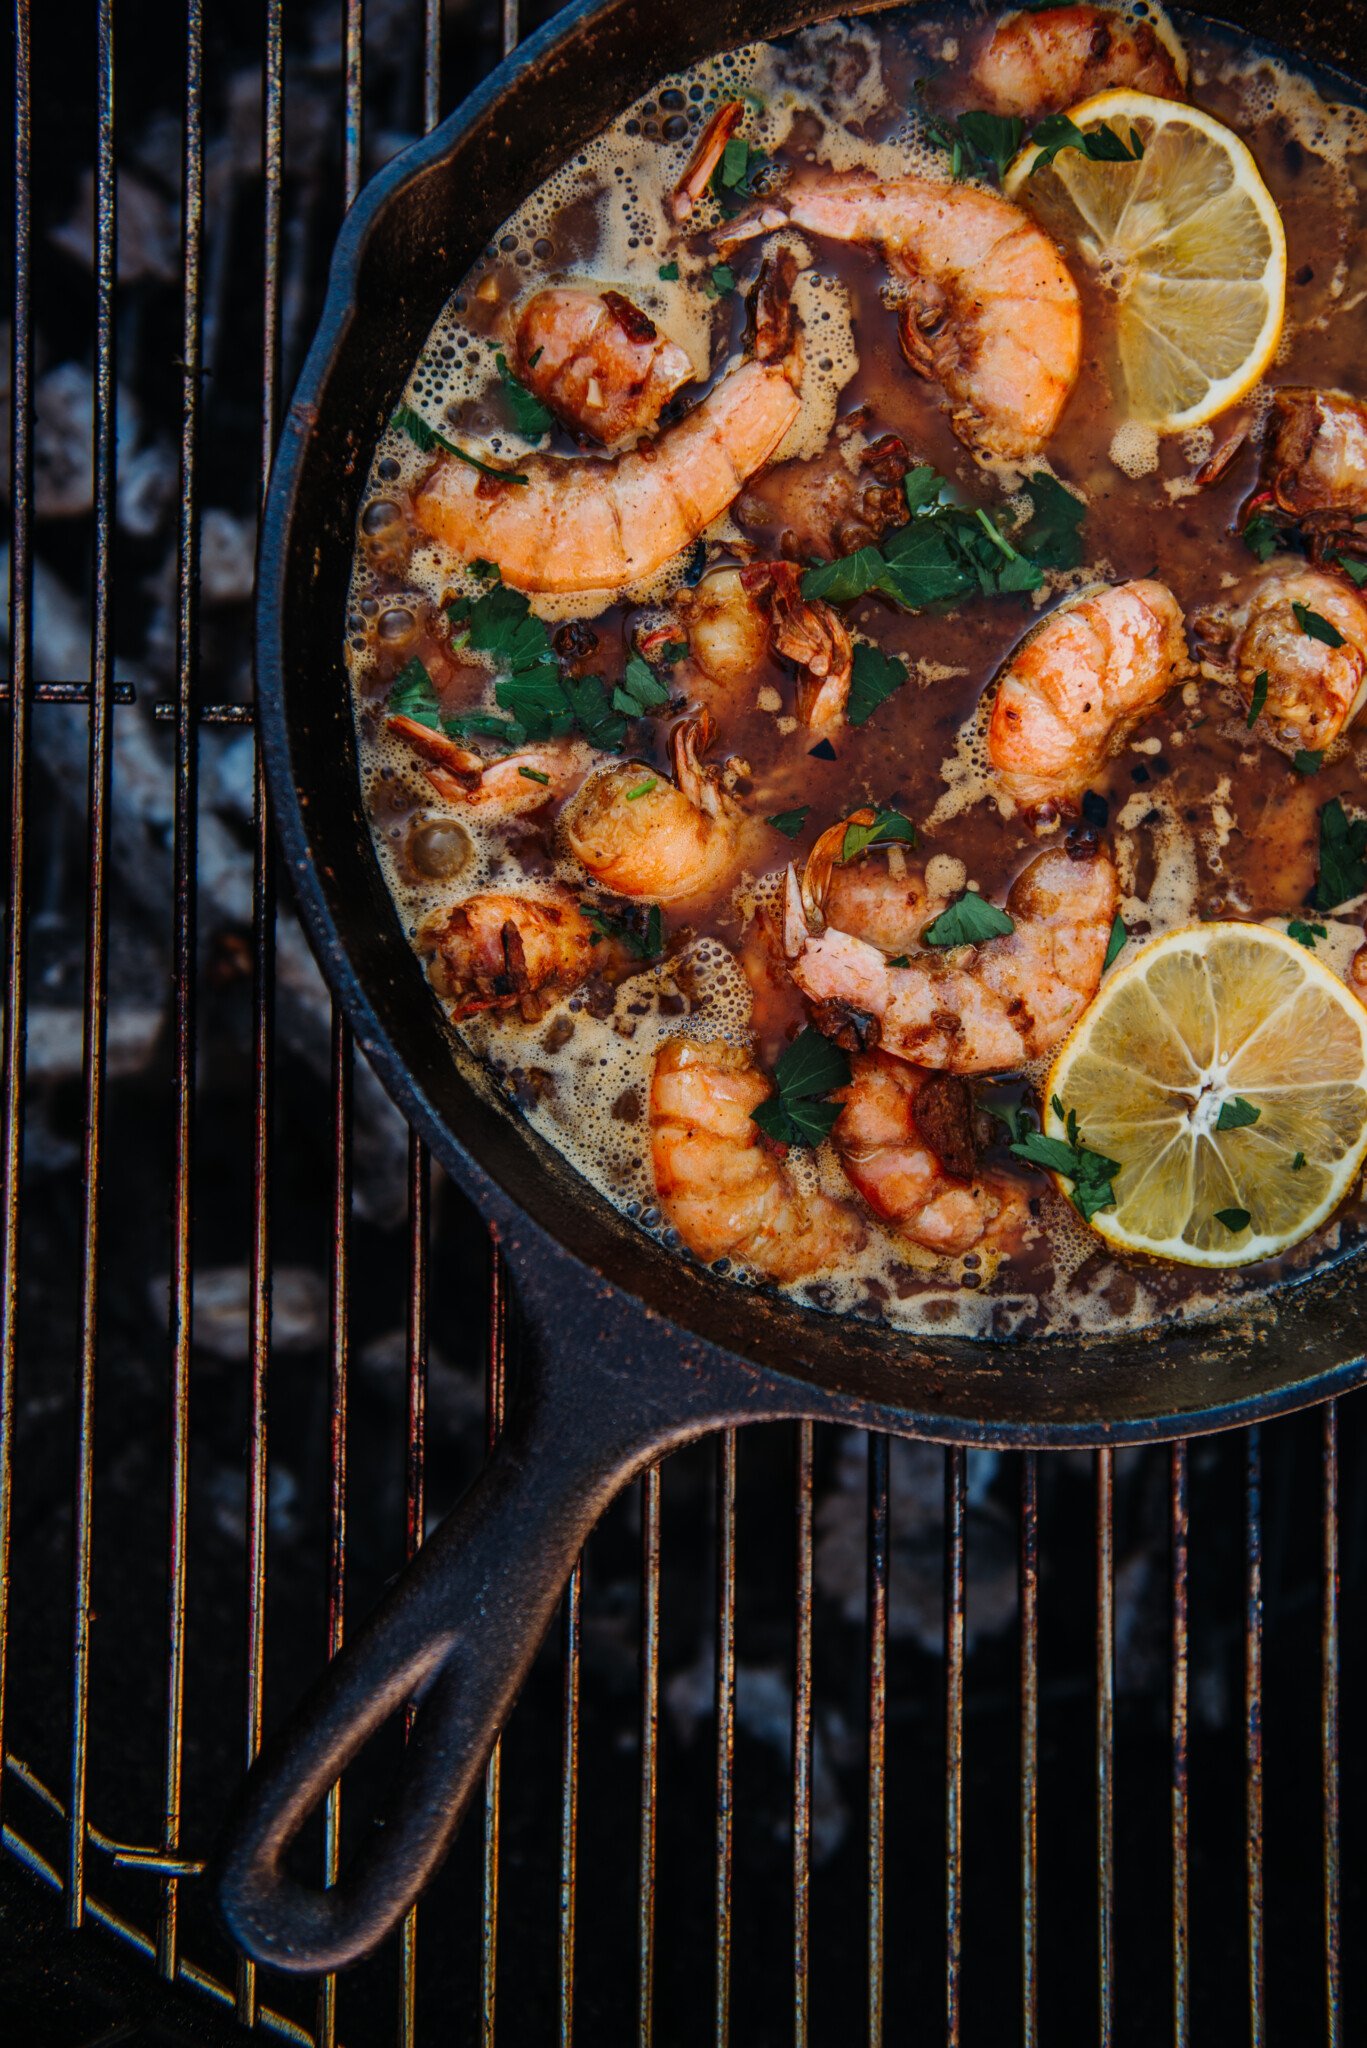 Cast iron skillet of new orleans shrimp on grill.